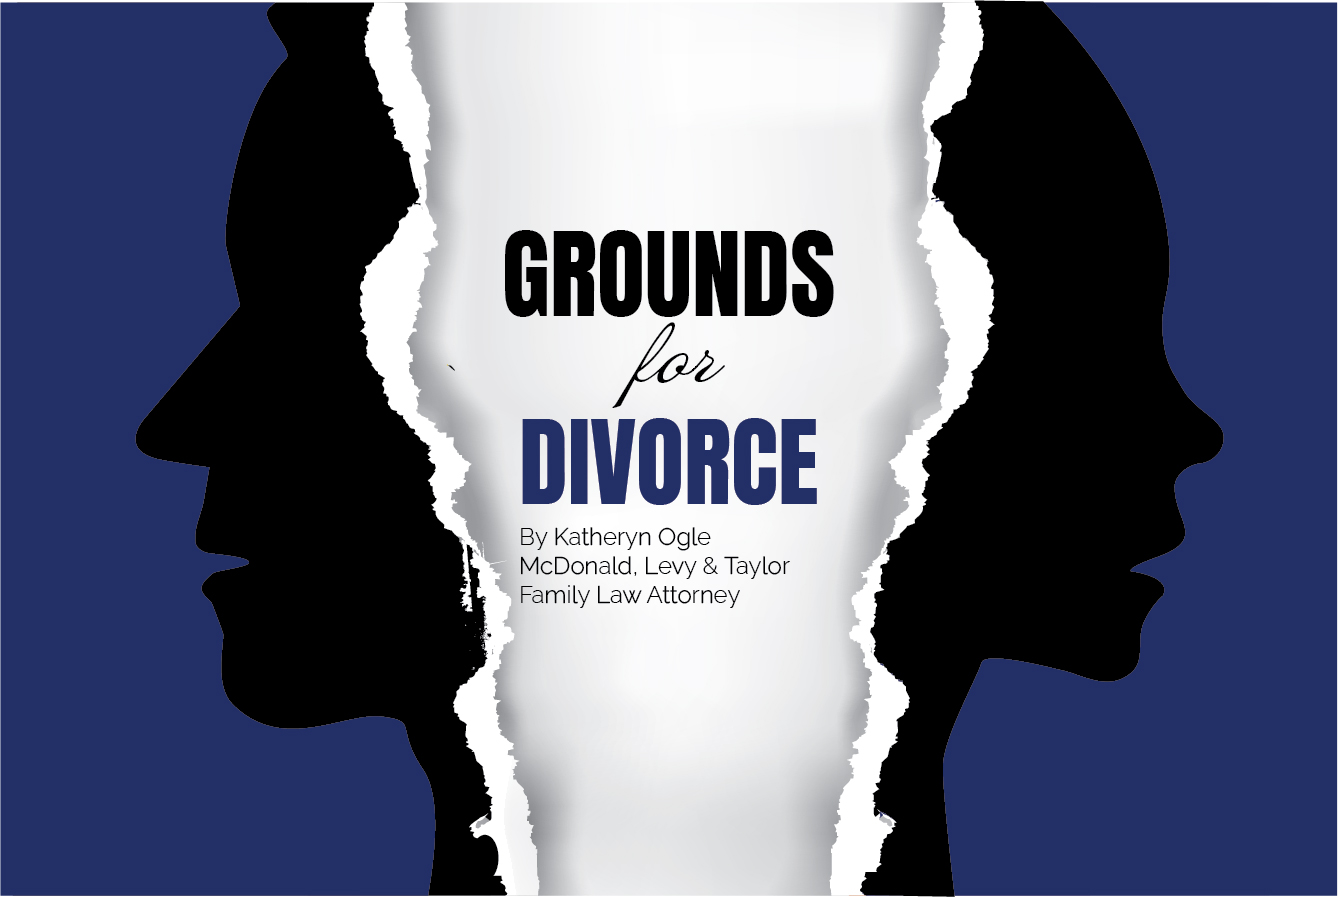 McDonald, Levy & Taylor's Attorney Katheryn Ogle's "Grounds for Divorce"